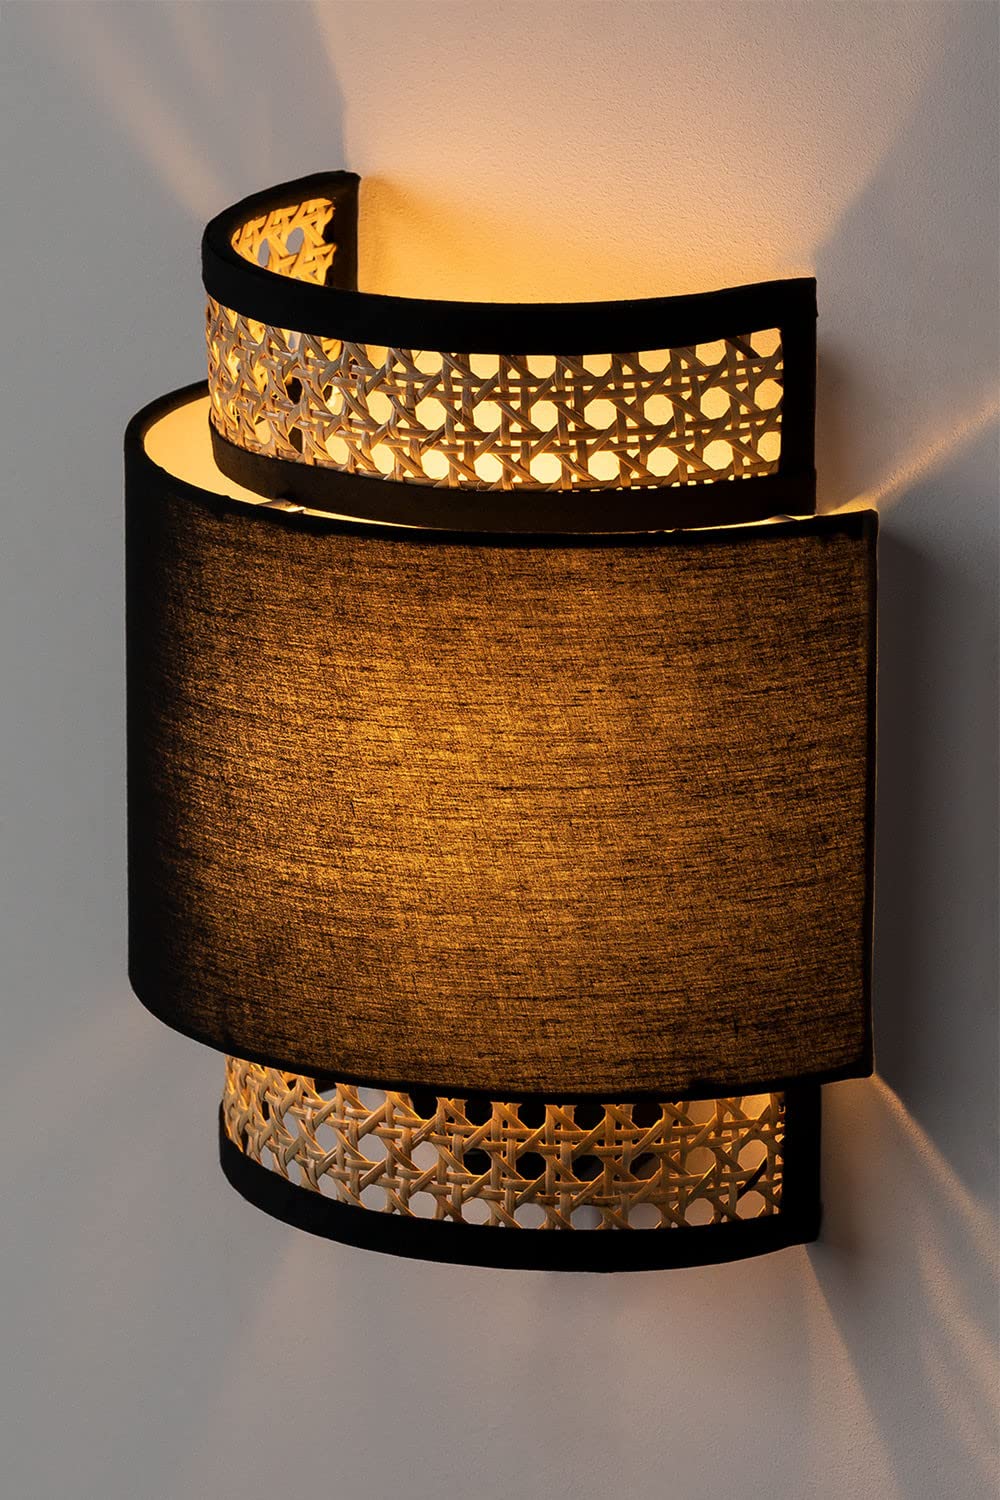 AKWAY Bamboo Wall Lamps for Living Rooms | Rattan and Cane Webbing Wall Lamps for Bedroom | Wicker Wall Lamps for Home Decoration (Bulb not Included) (Black) - Akway